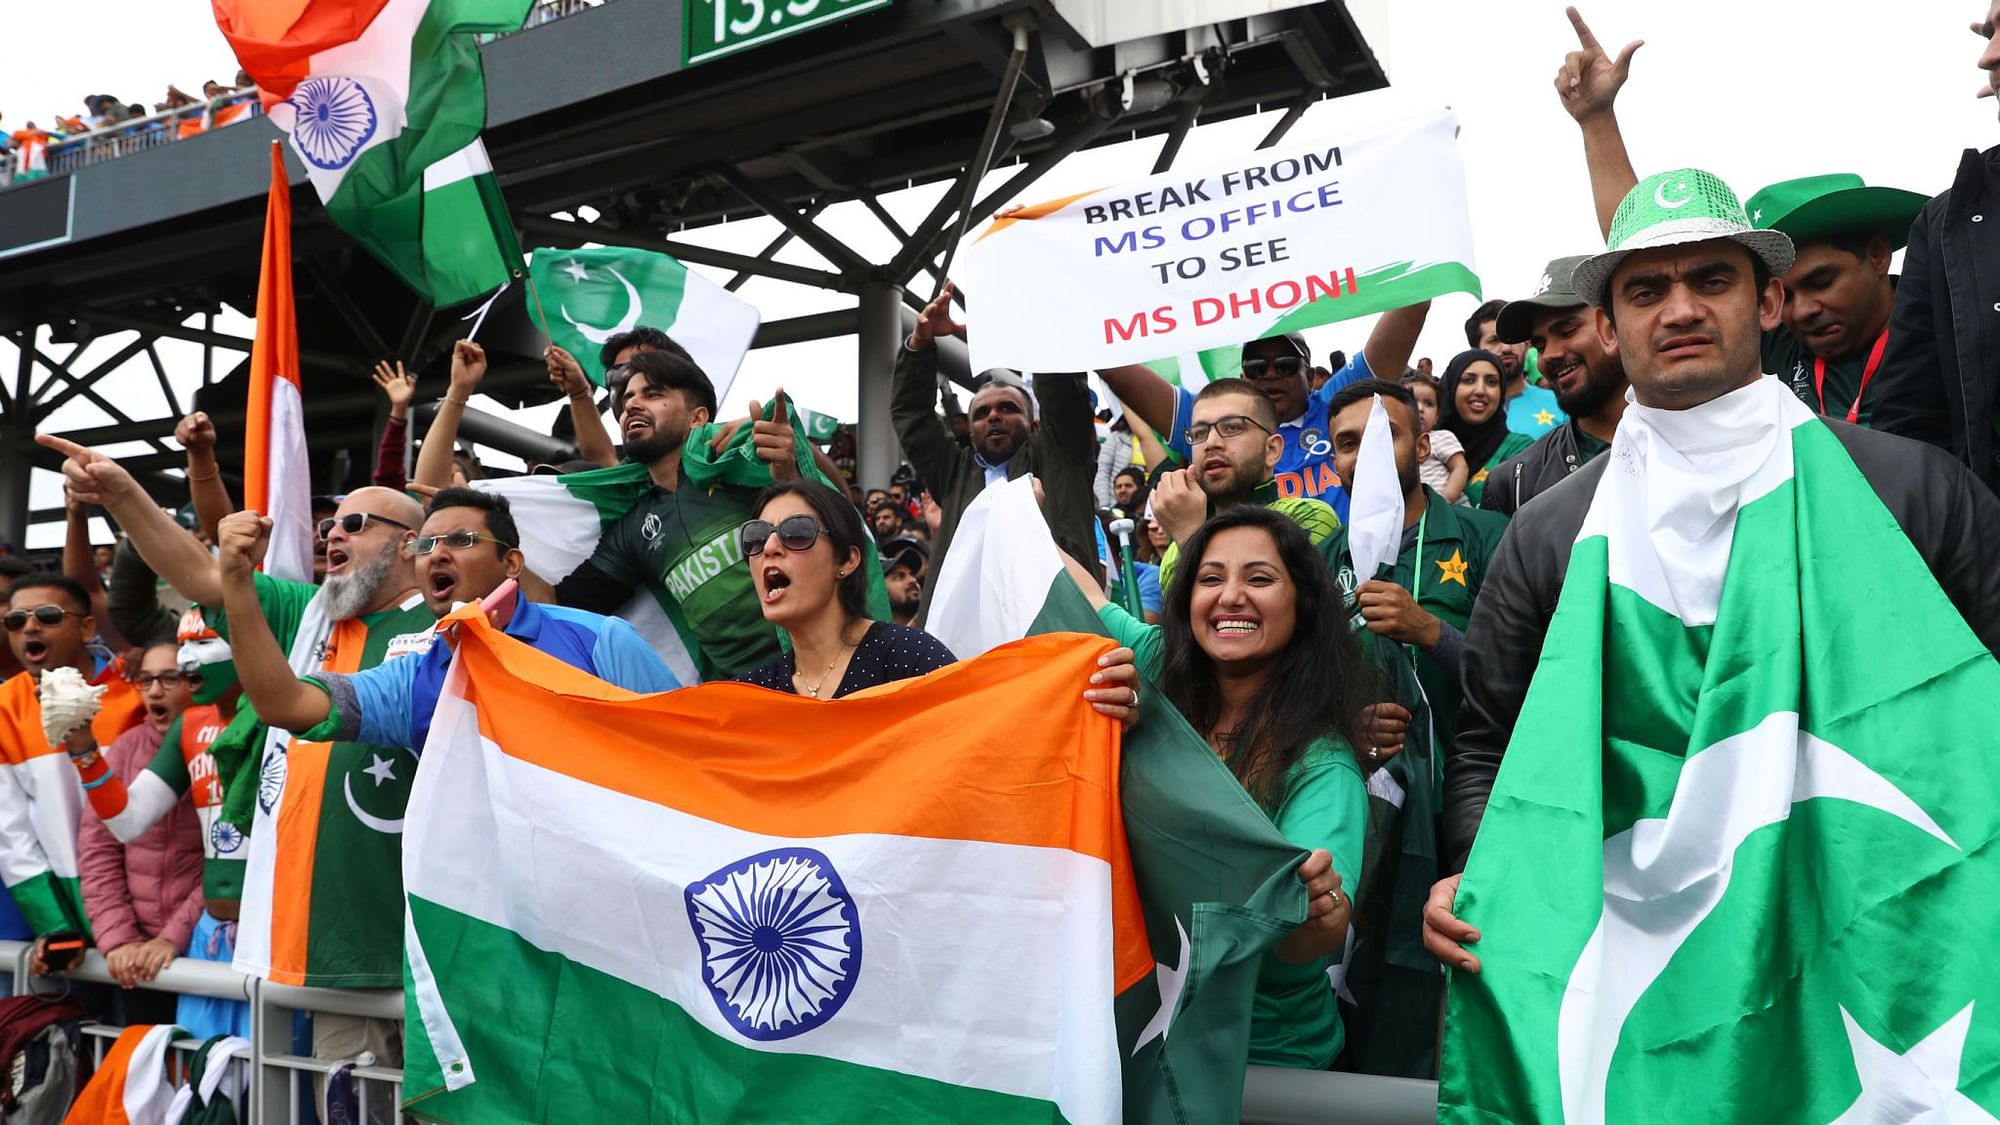 Fans in Pakistan are hyped up about the upcoming Indo-Pak cricket match.